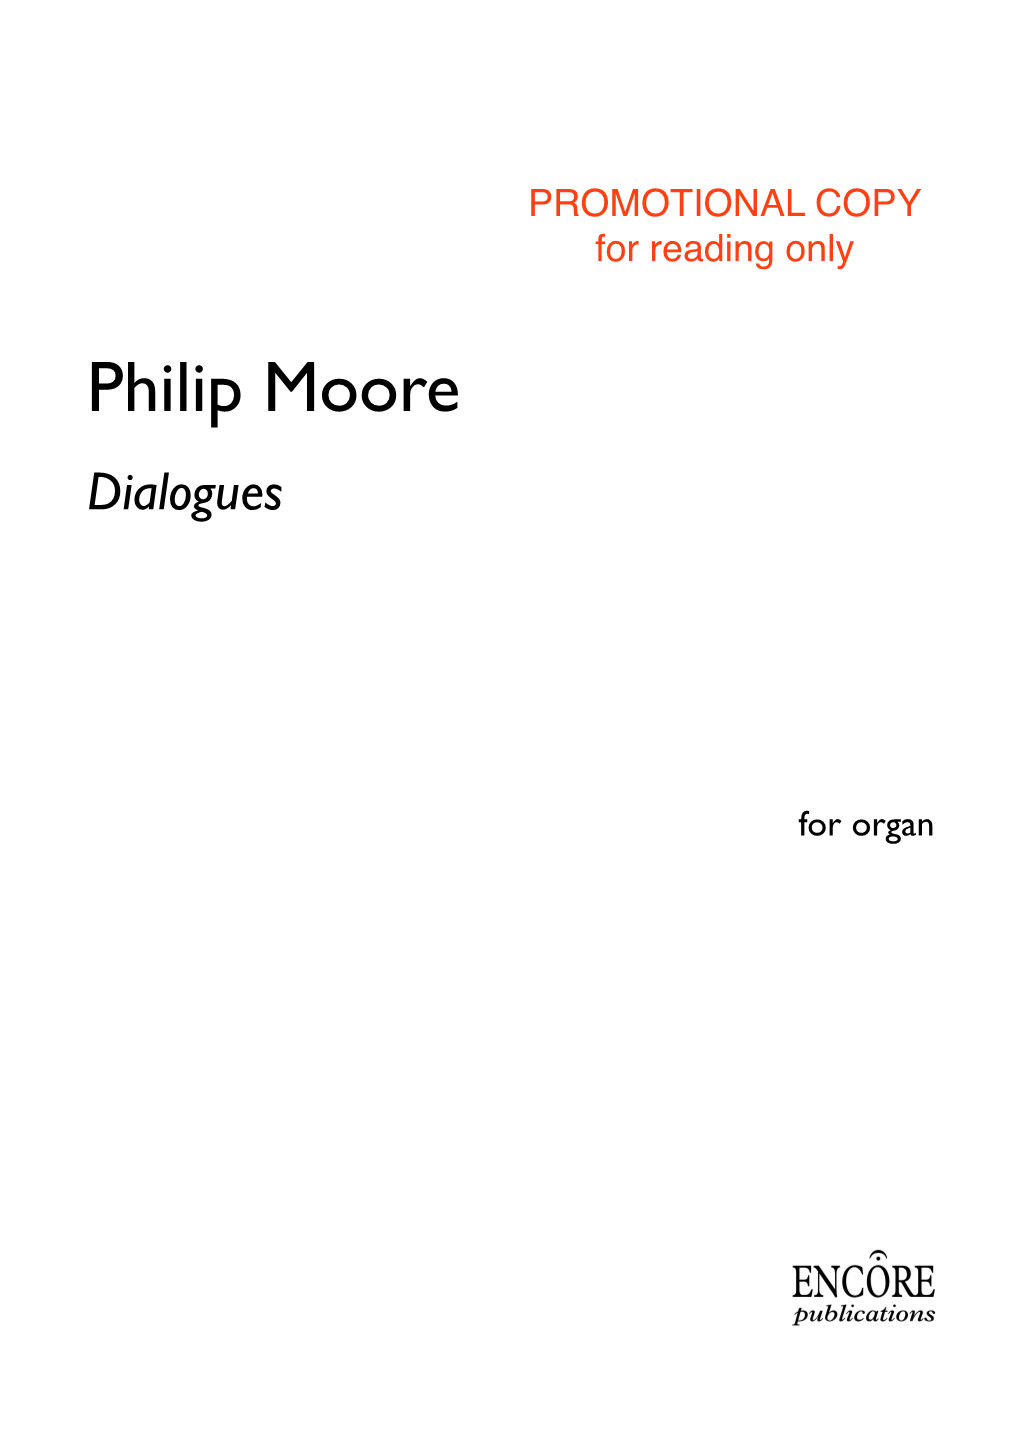 Philip Moore Dialogues